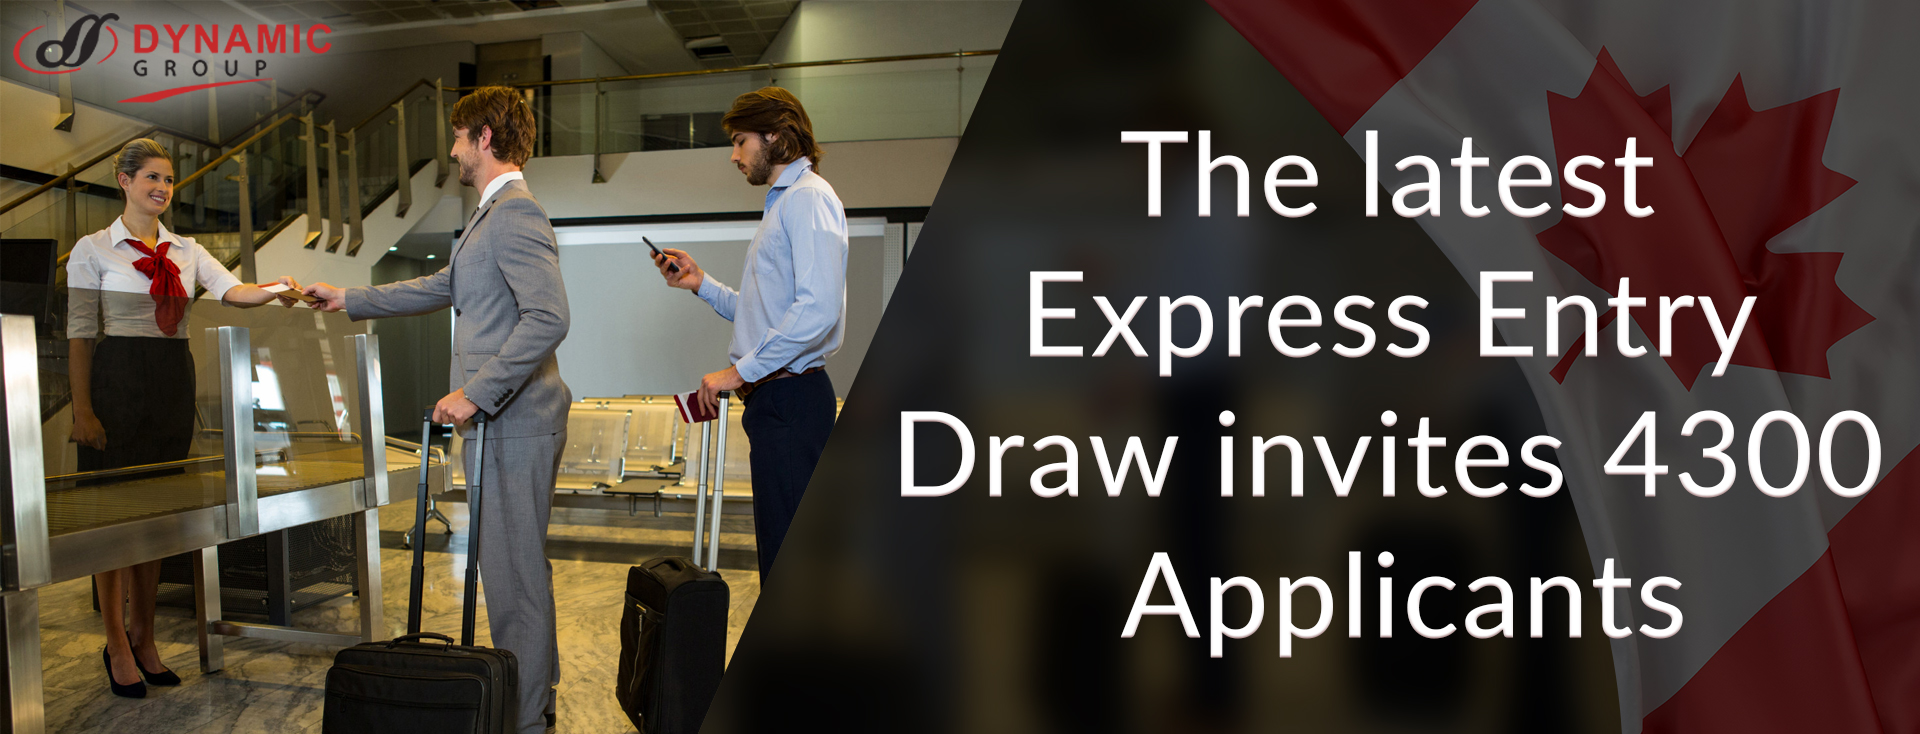 The latest Express Entry Draw invites 4300 Applicants